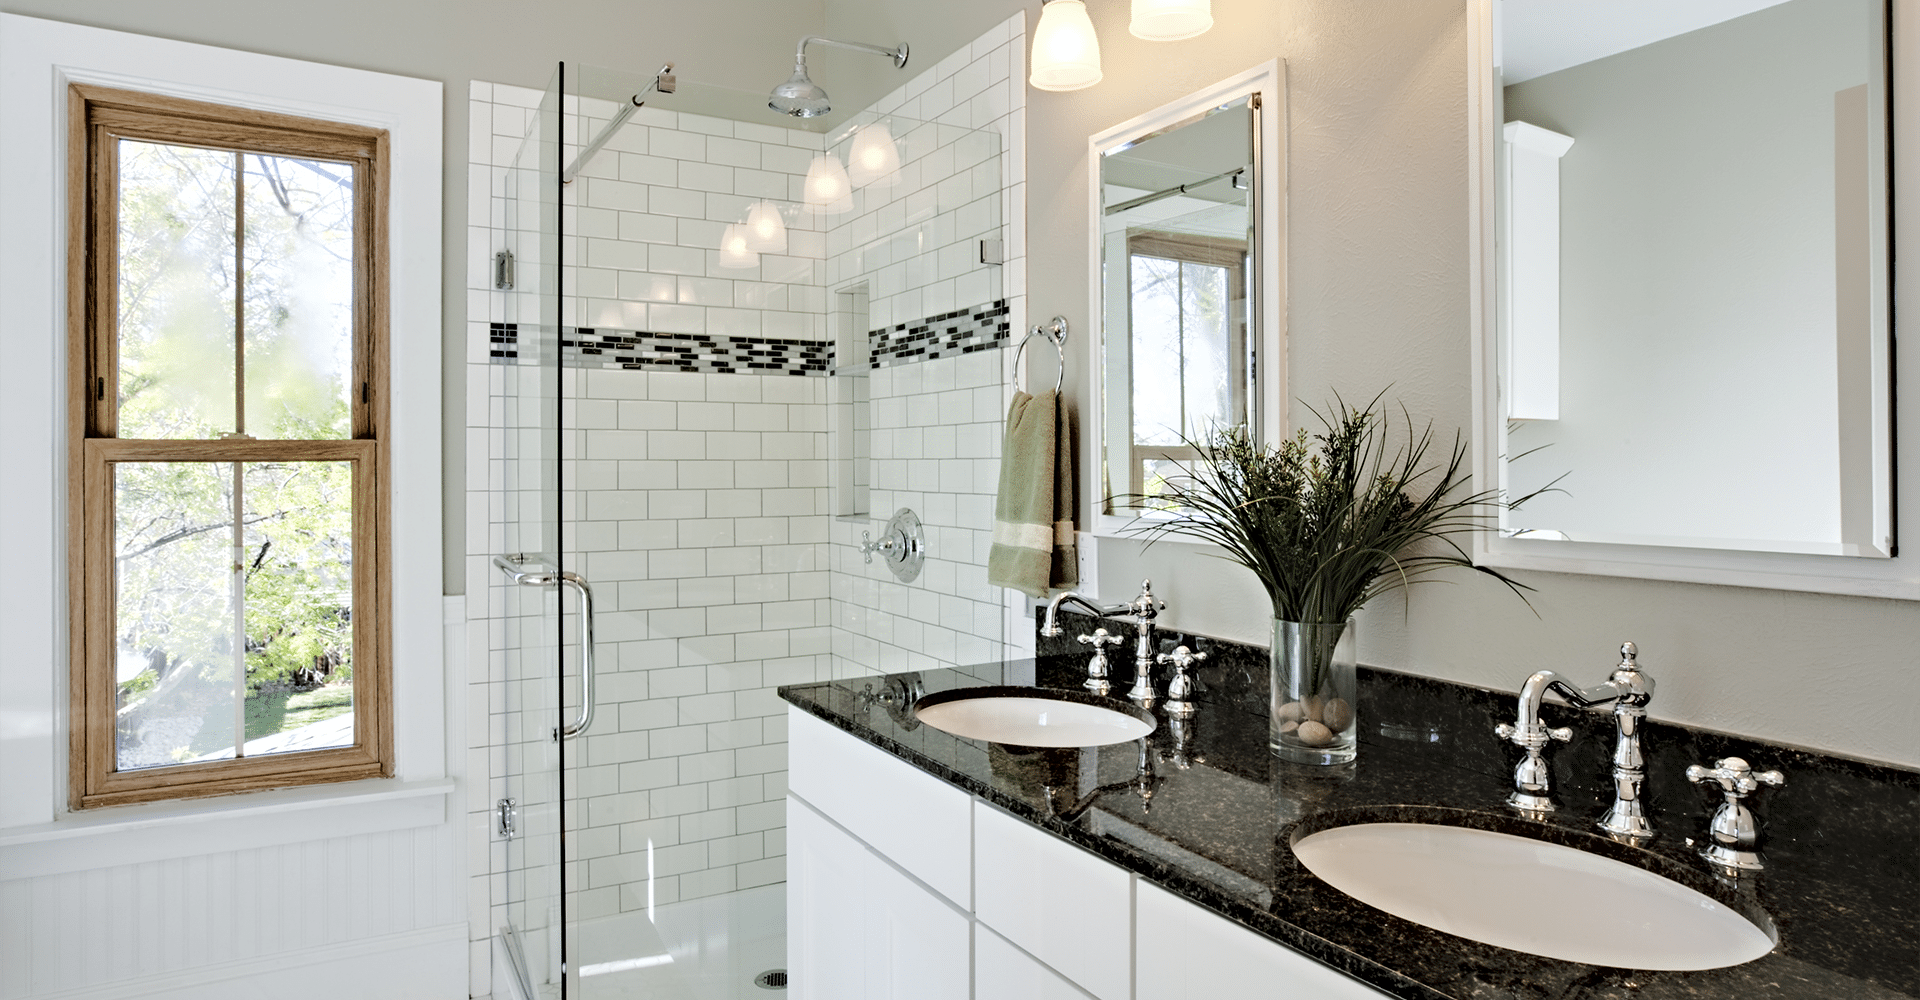 Tips on Hiring a Bathroom Remodeling Contractor